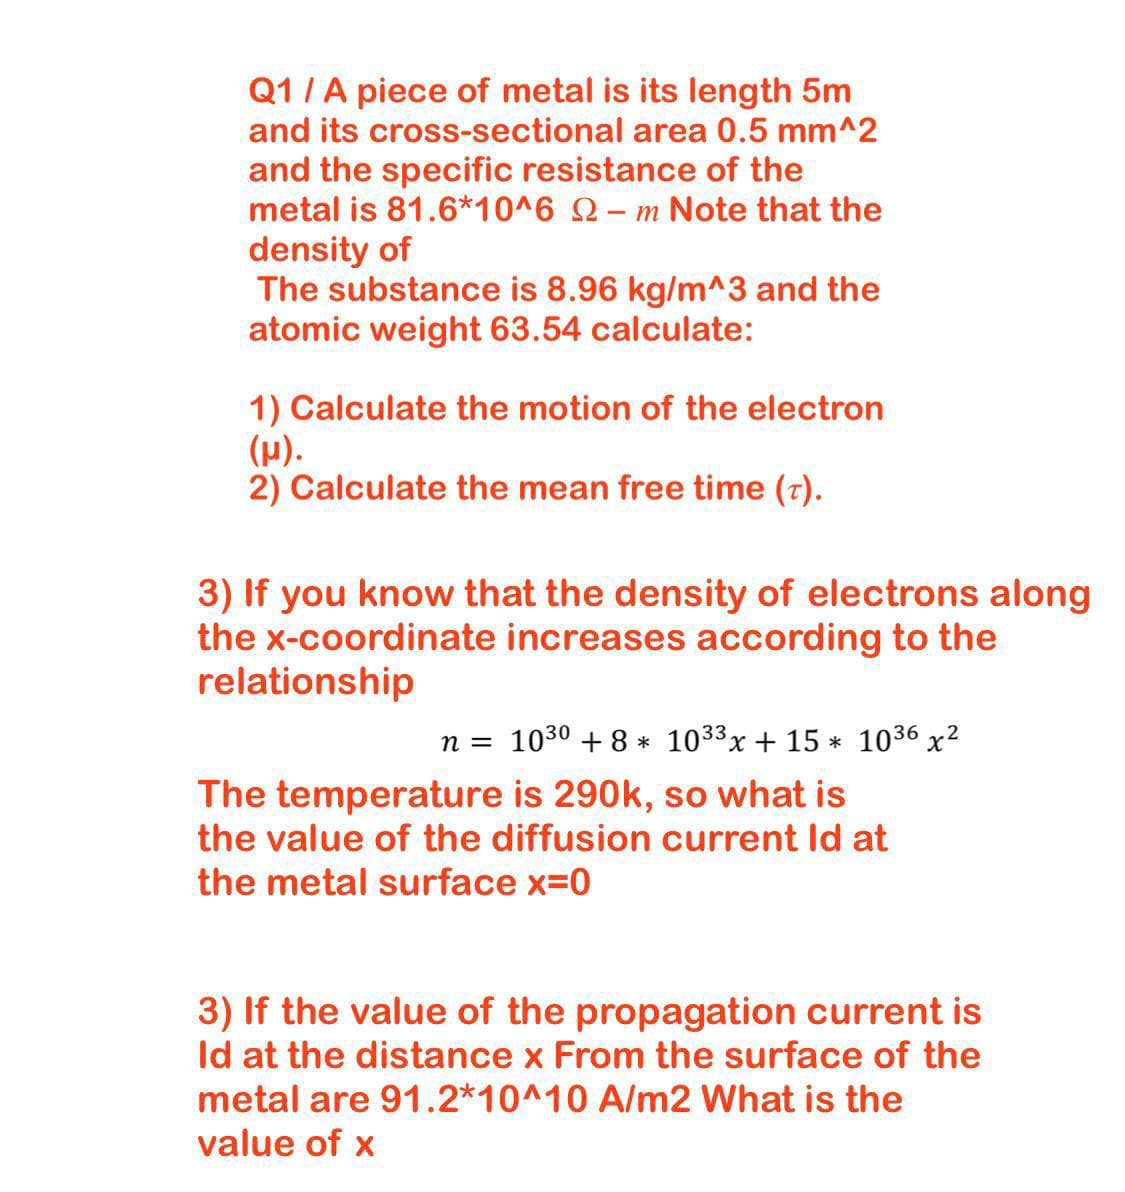 Q1 /A piece of metal is its length 5m
and its cross-sectional area 0.5 mm^2
and the specific resistance of the
metal is 81.6*10^6 Q– m Note that the
density of
The substance is 8.96 kg/m^3 and the
atomic weight 63.54 calculate:
1) Calculate the motion of the electron
(H).
2) Calculate the mean free time (7).
3) If you know that the density of electrons along
the x-coordinate increases according to the
relationship
n = 1030 + 8 * 1033x + 15 * 1036 x2
The temperature is 290k, so what is
the value of the diffusion current Id at
the metal surface x=0
3) If the value of the propagation current is
Id at the distance x From the surface of the
metal are 91.2*10^10 A/m2 What is the
value of x
